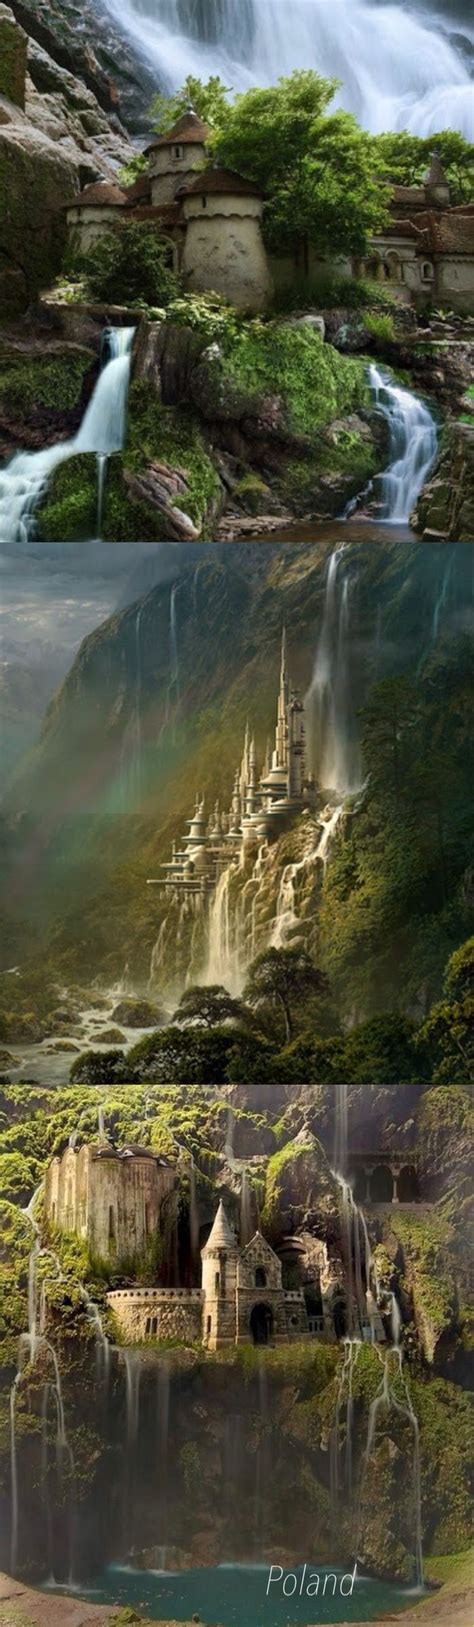 An Image Of A Castle In The Middle Of A Forest With Waterfalls And Trees